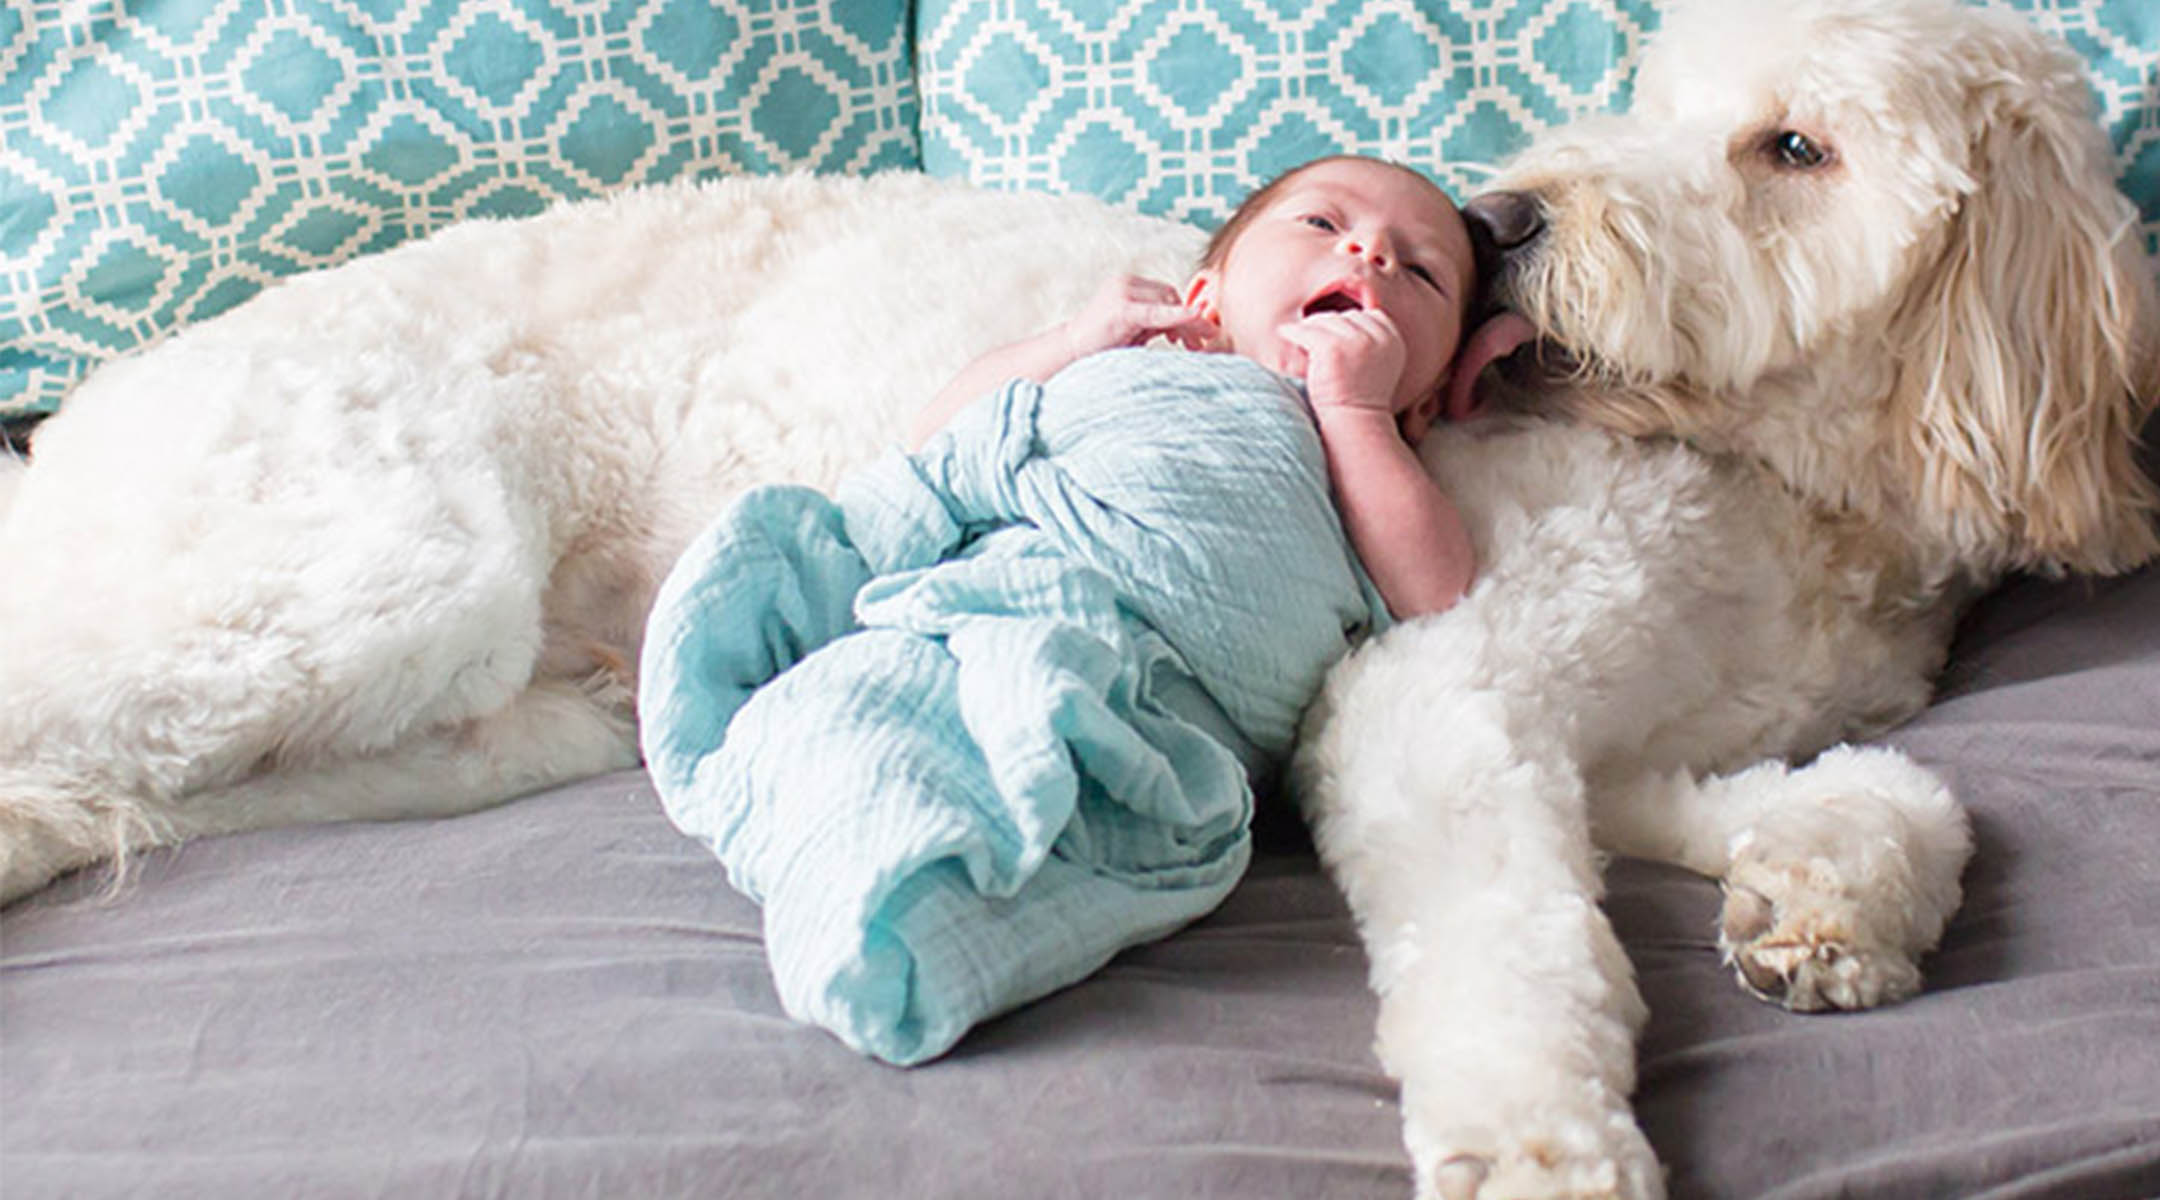 newborn baby snuggling with pet dog on the bed at home